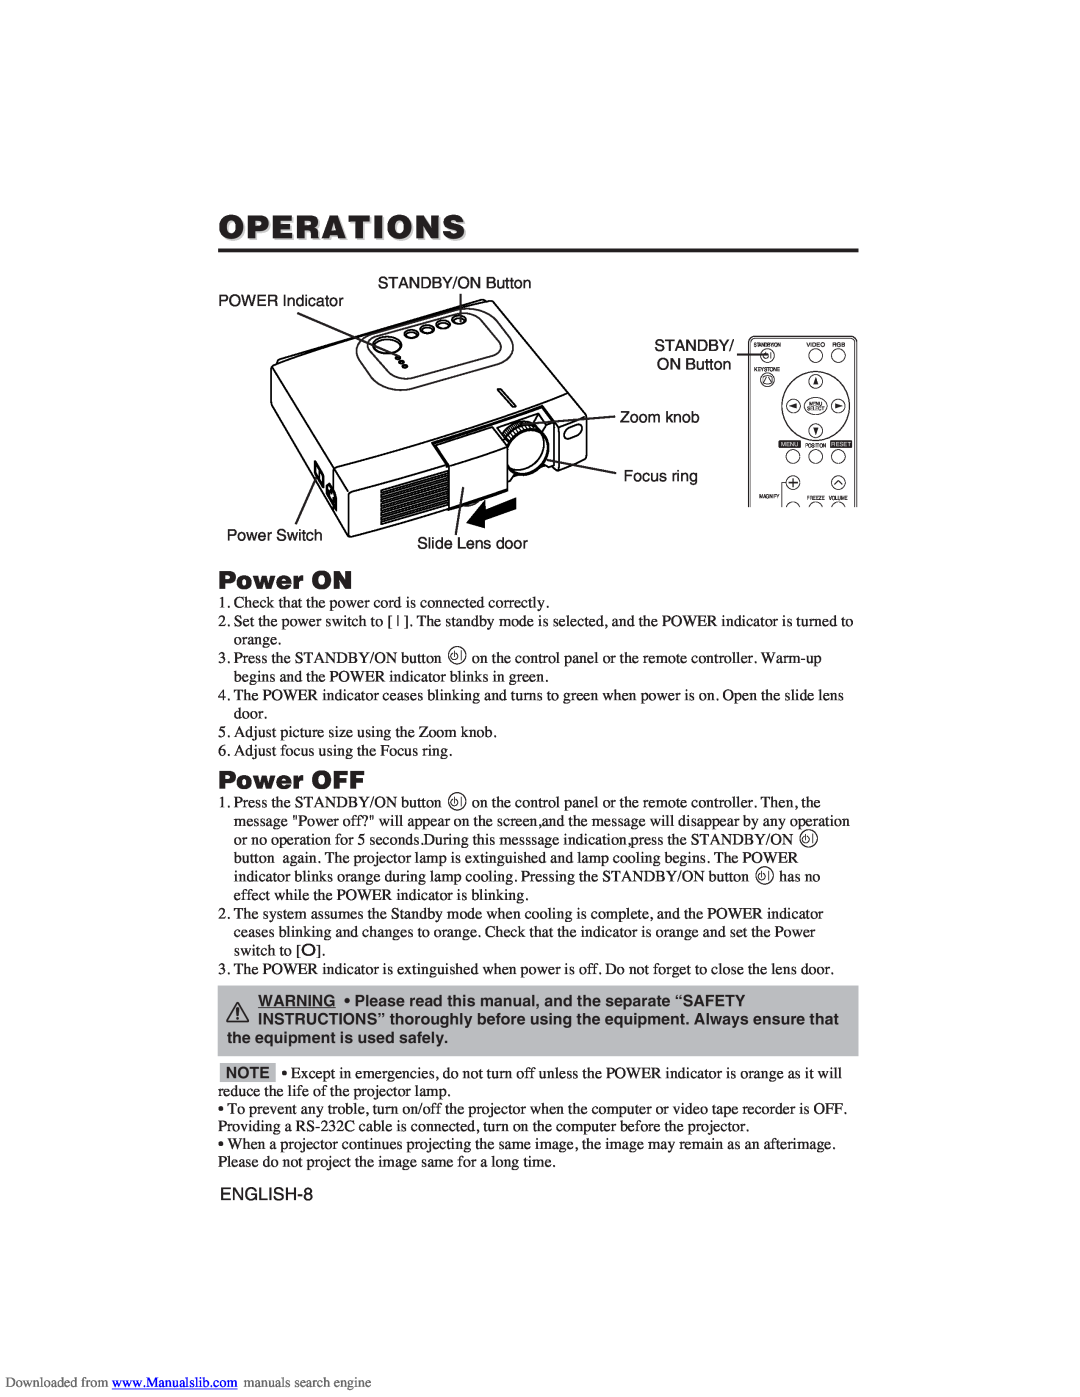 Hitachi CP-X275W user manual Operations, Power ON, Power OFF 